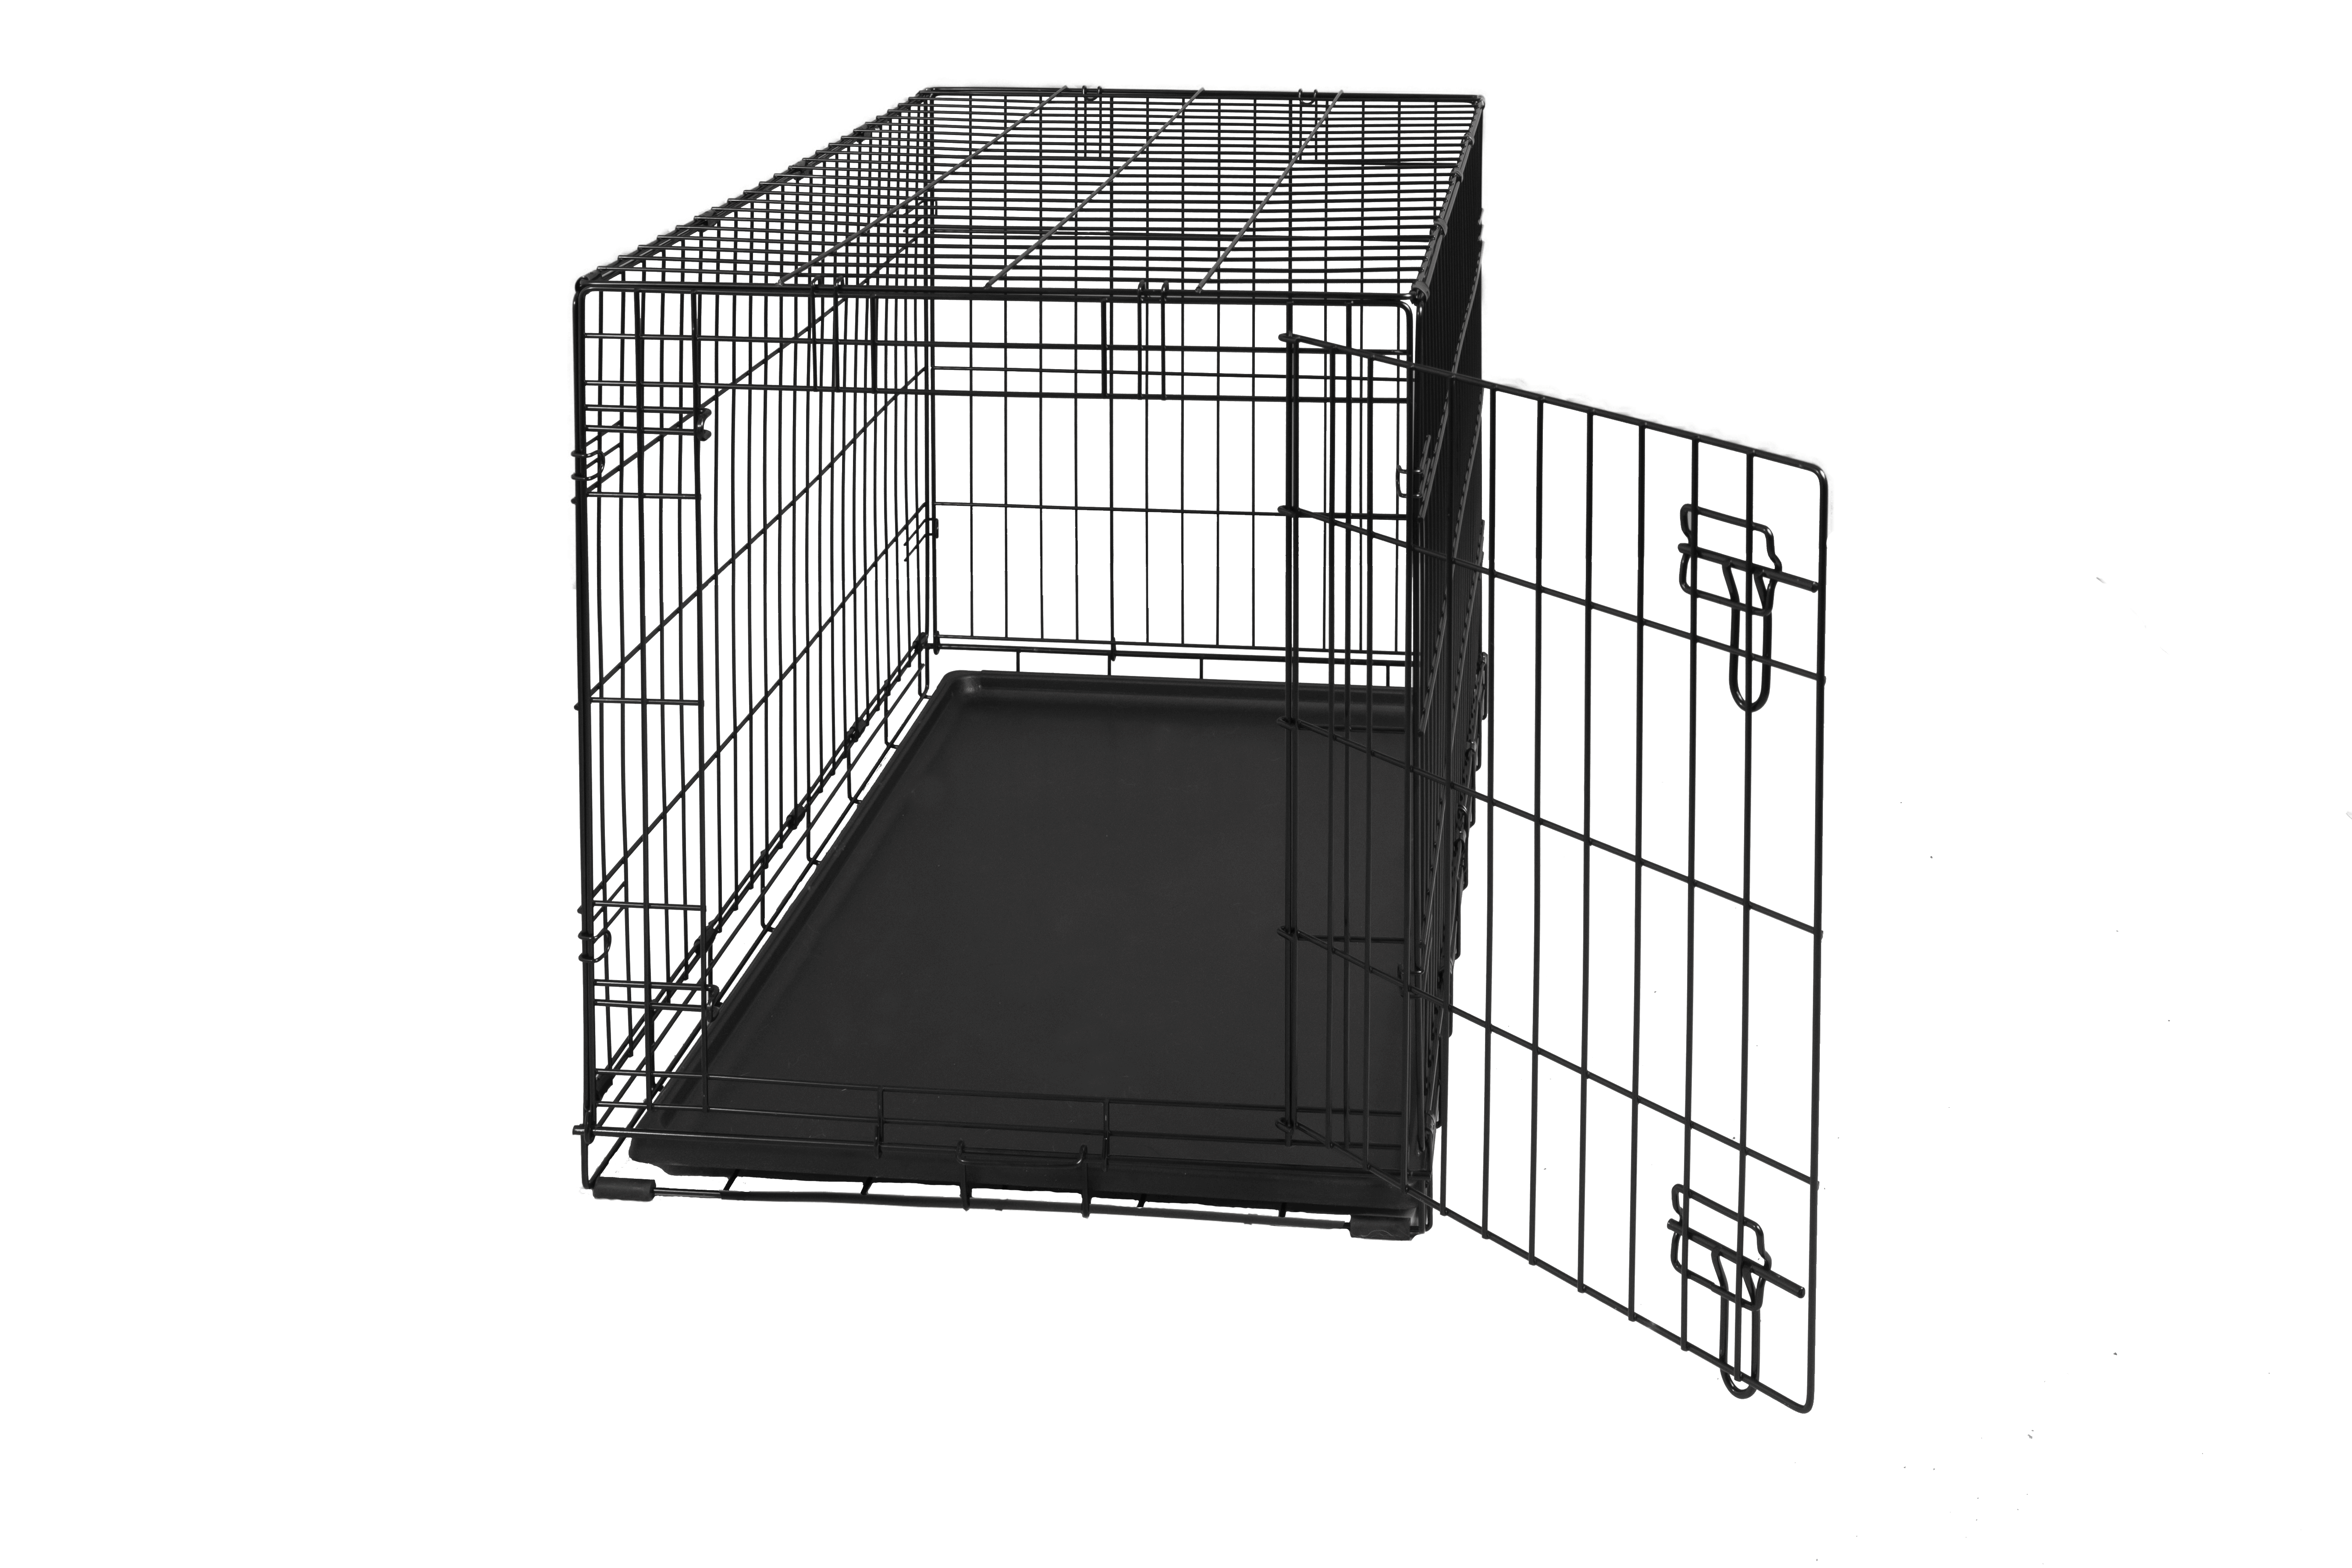 Hollywood Feed 36 inch black dog kennel with 1 door